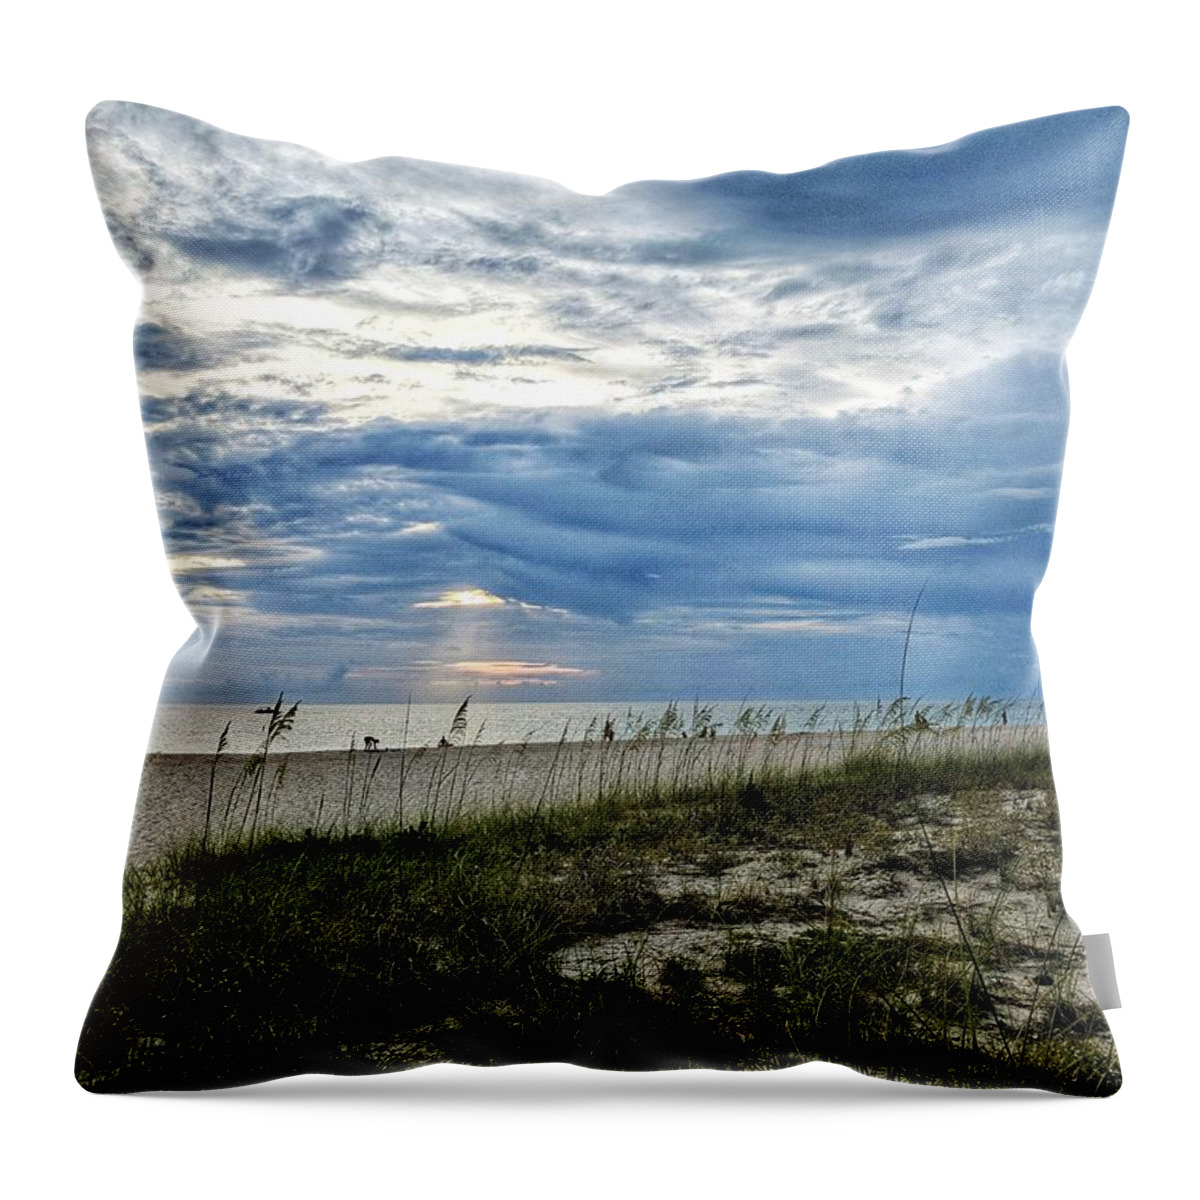 Moments Throw Pillow featuring the photograph Moments Like This by Portia Olaughlin